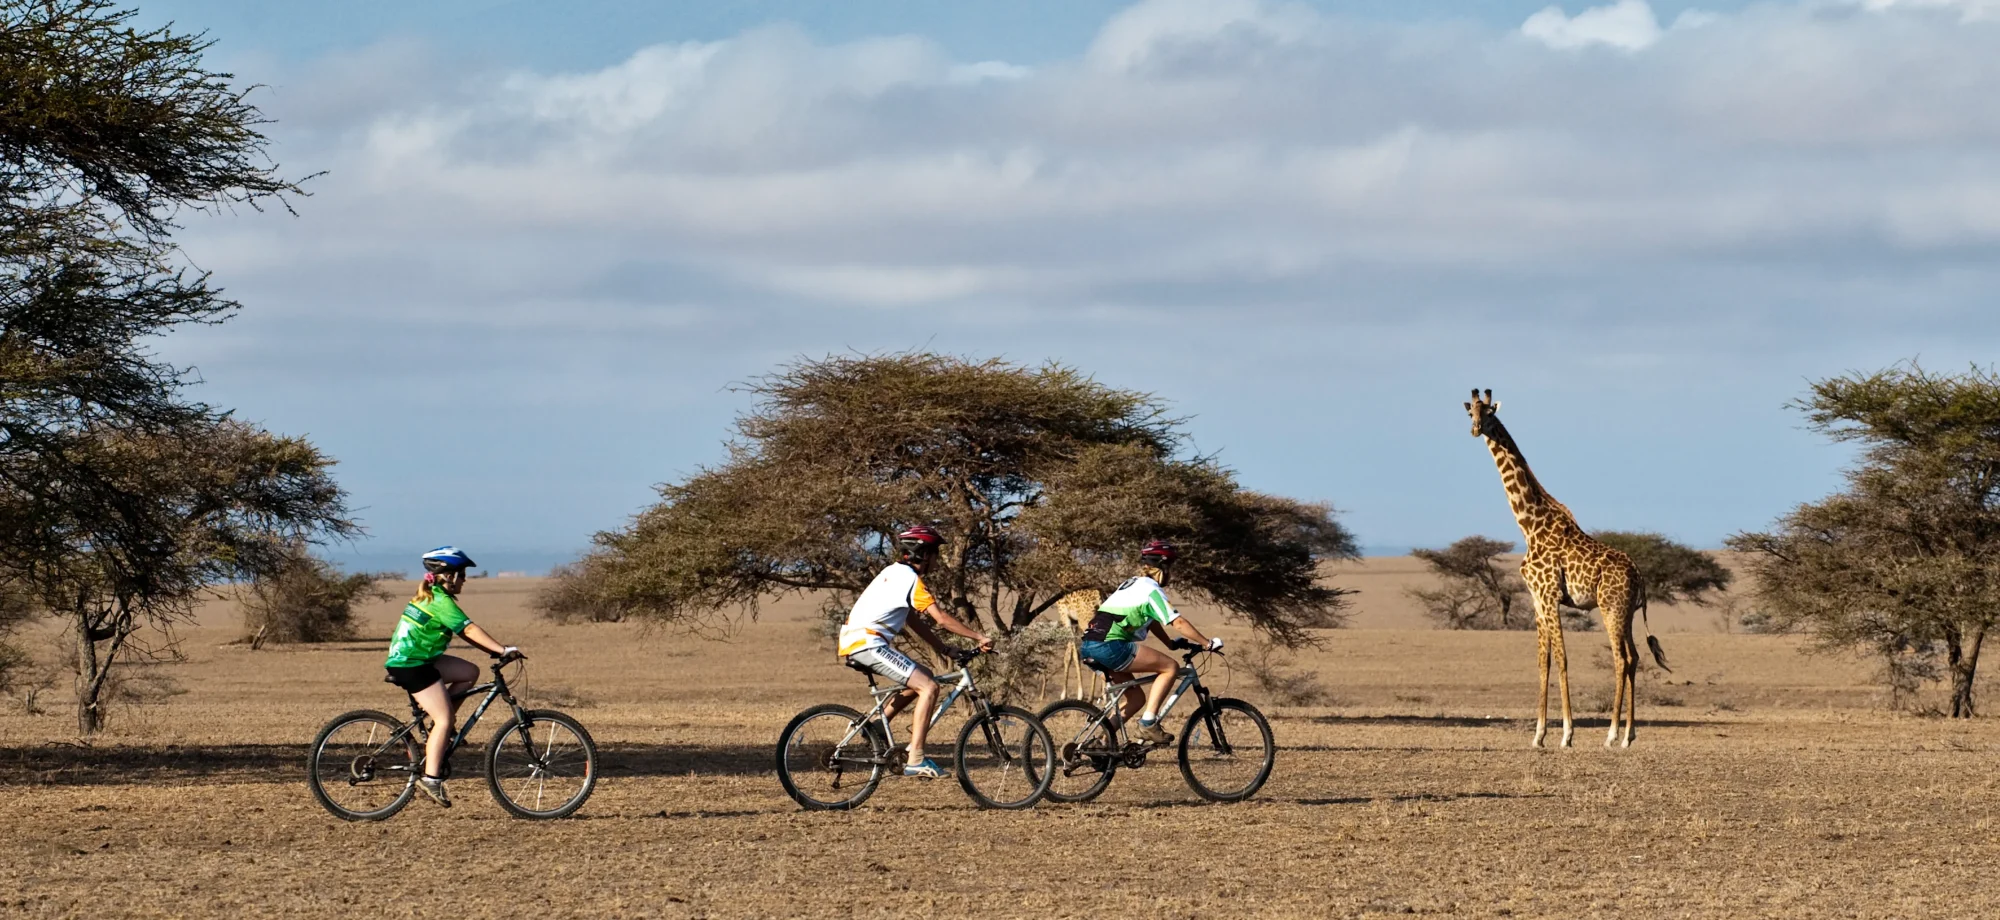 Three people ride bicycles on the savannah beside a giraffe during the day.